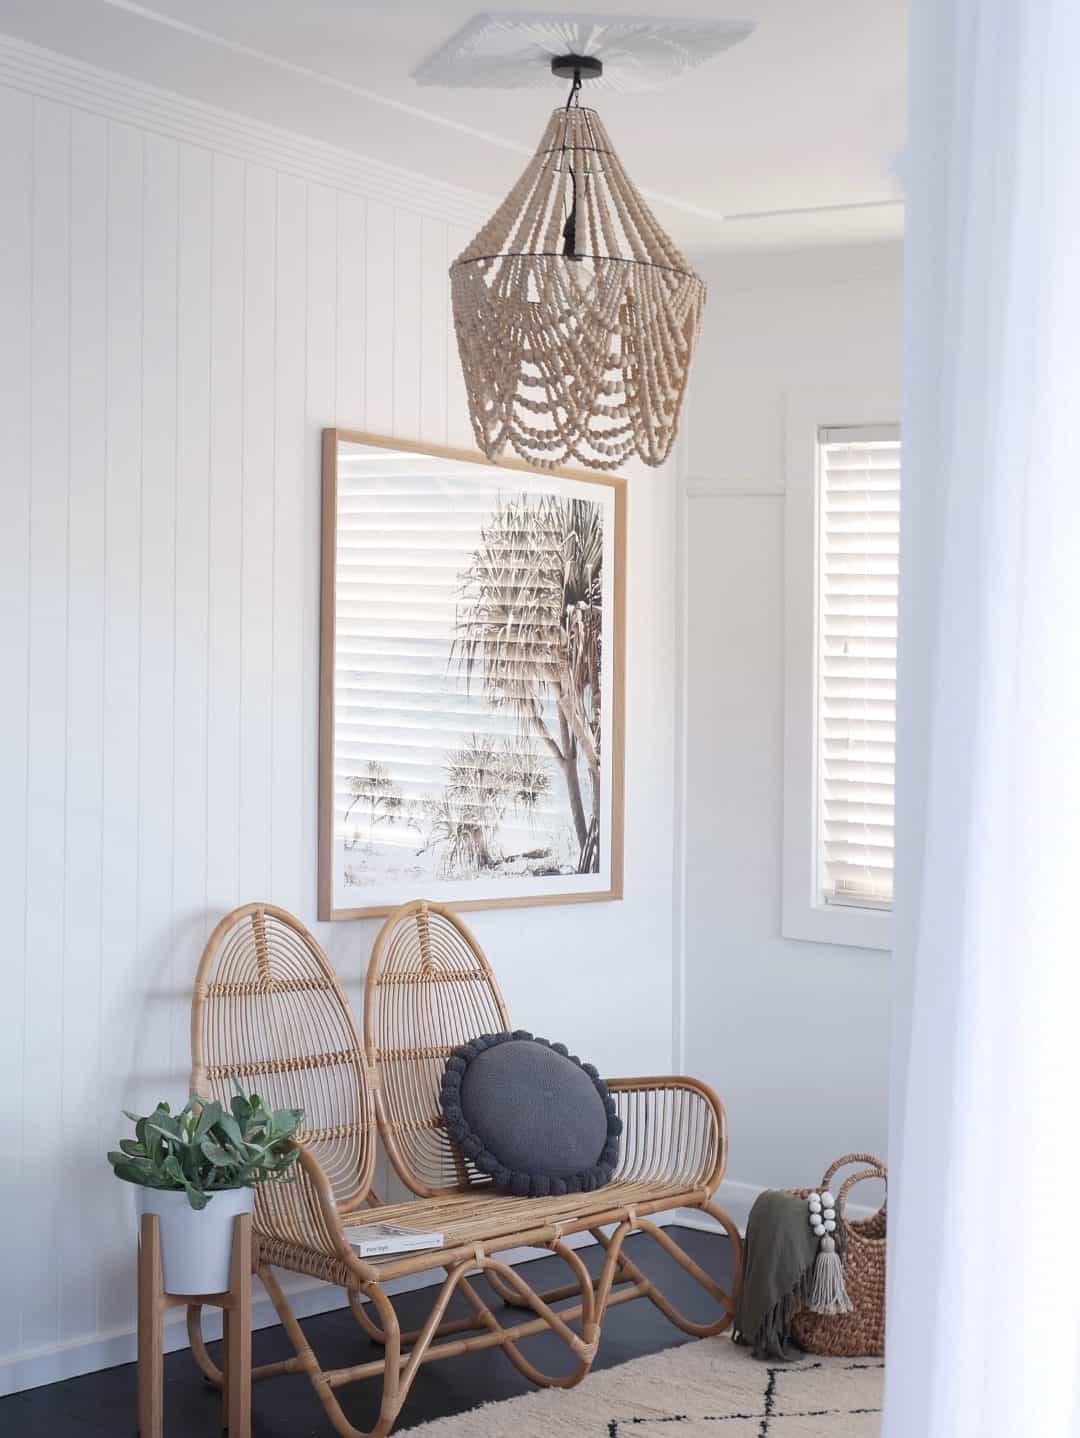 Wicker Chair and Pendant